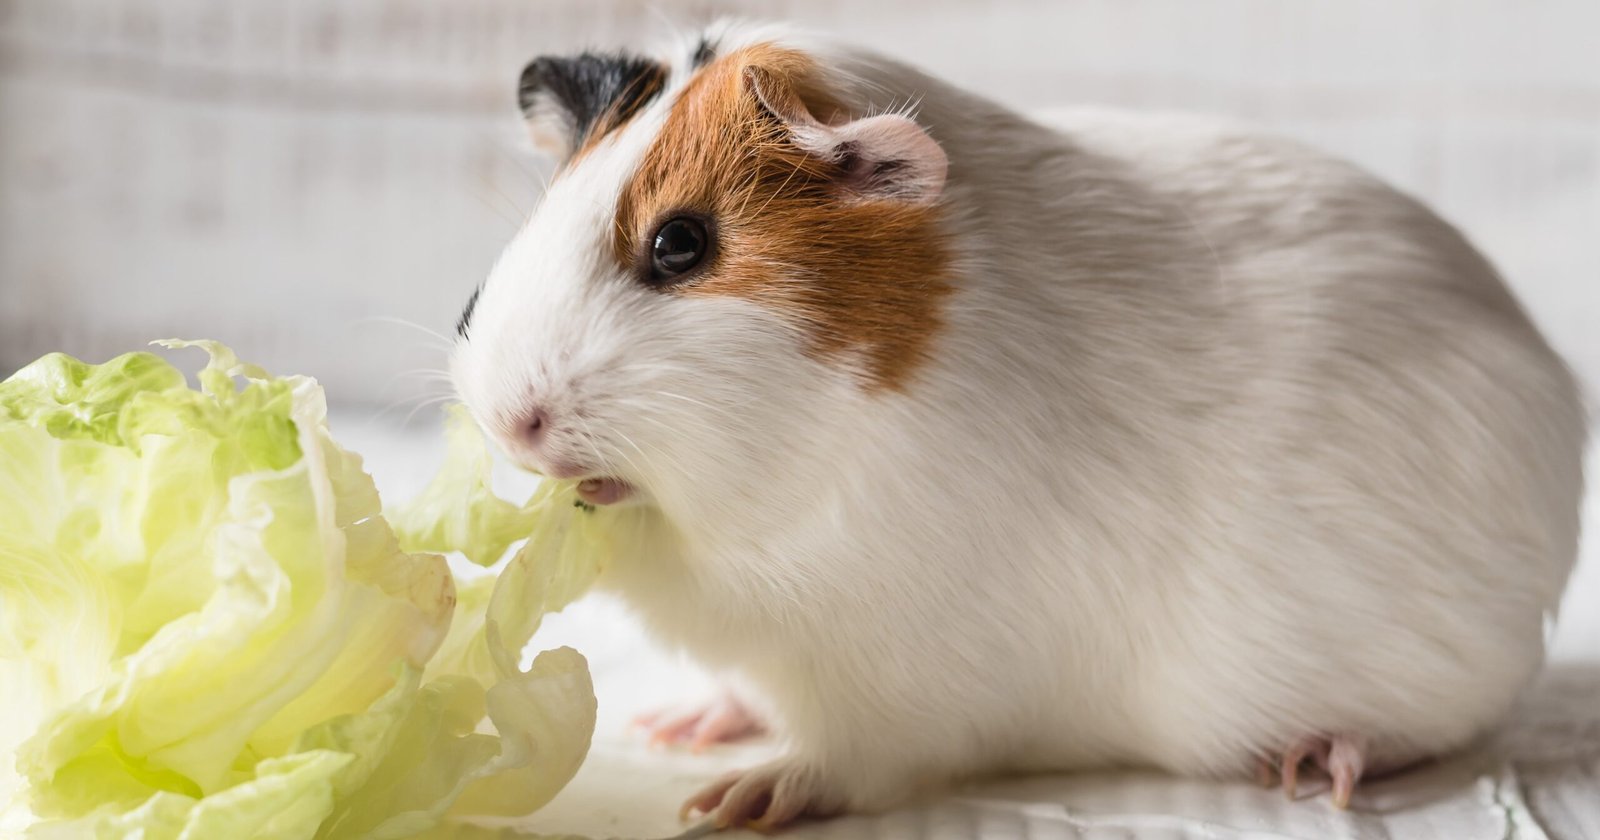 Can Hamsters Have Iceberg Lettuce?